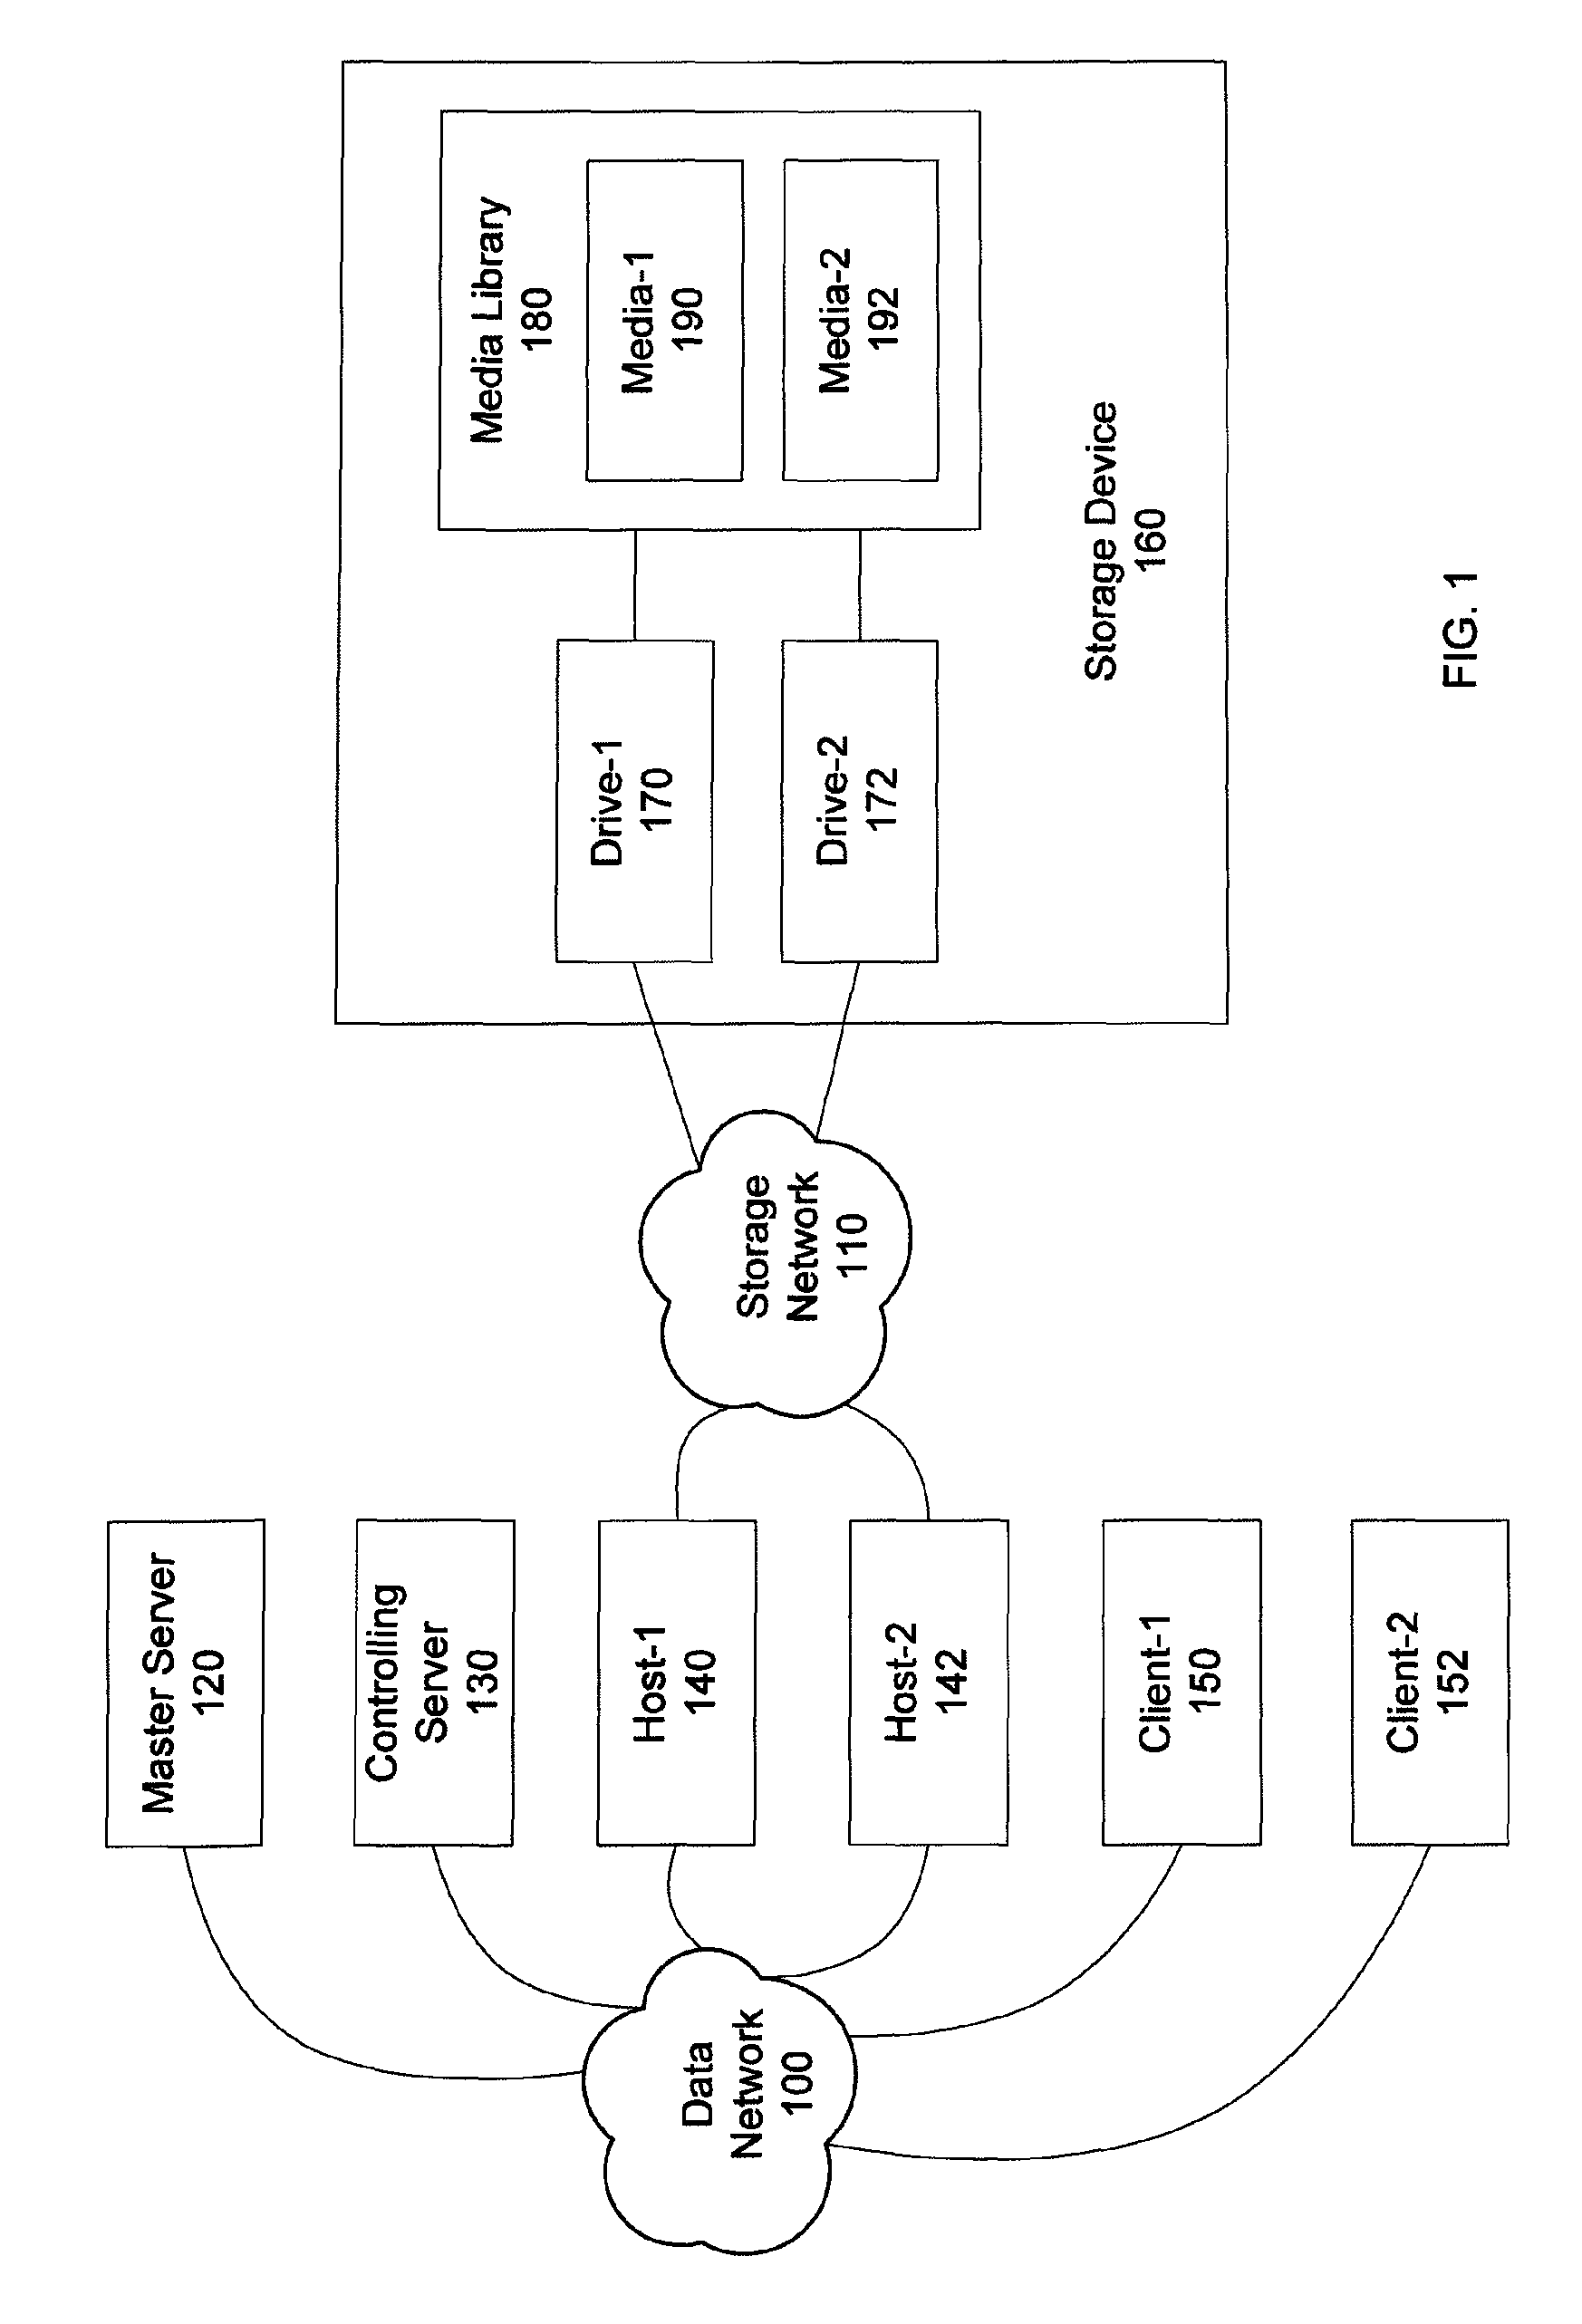 Techniques for host to host transfer of sequential media and use of persistent reservation to protect media during host to host transfer